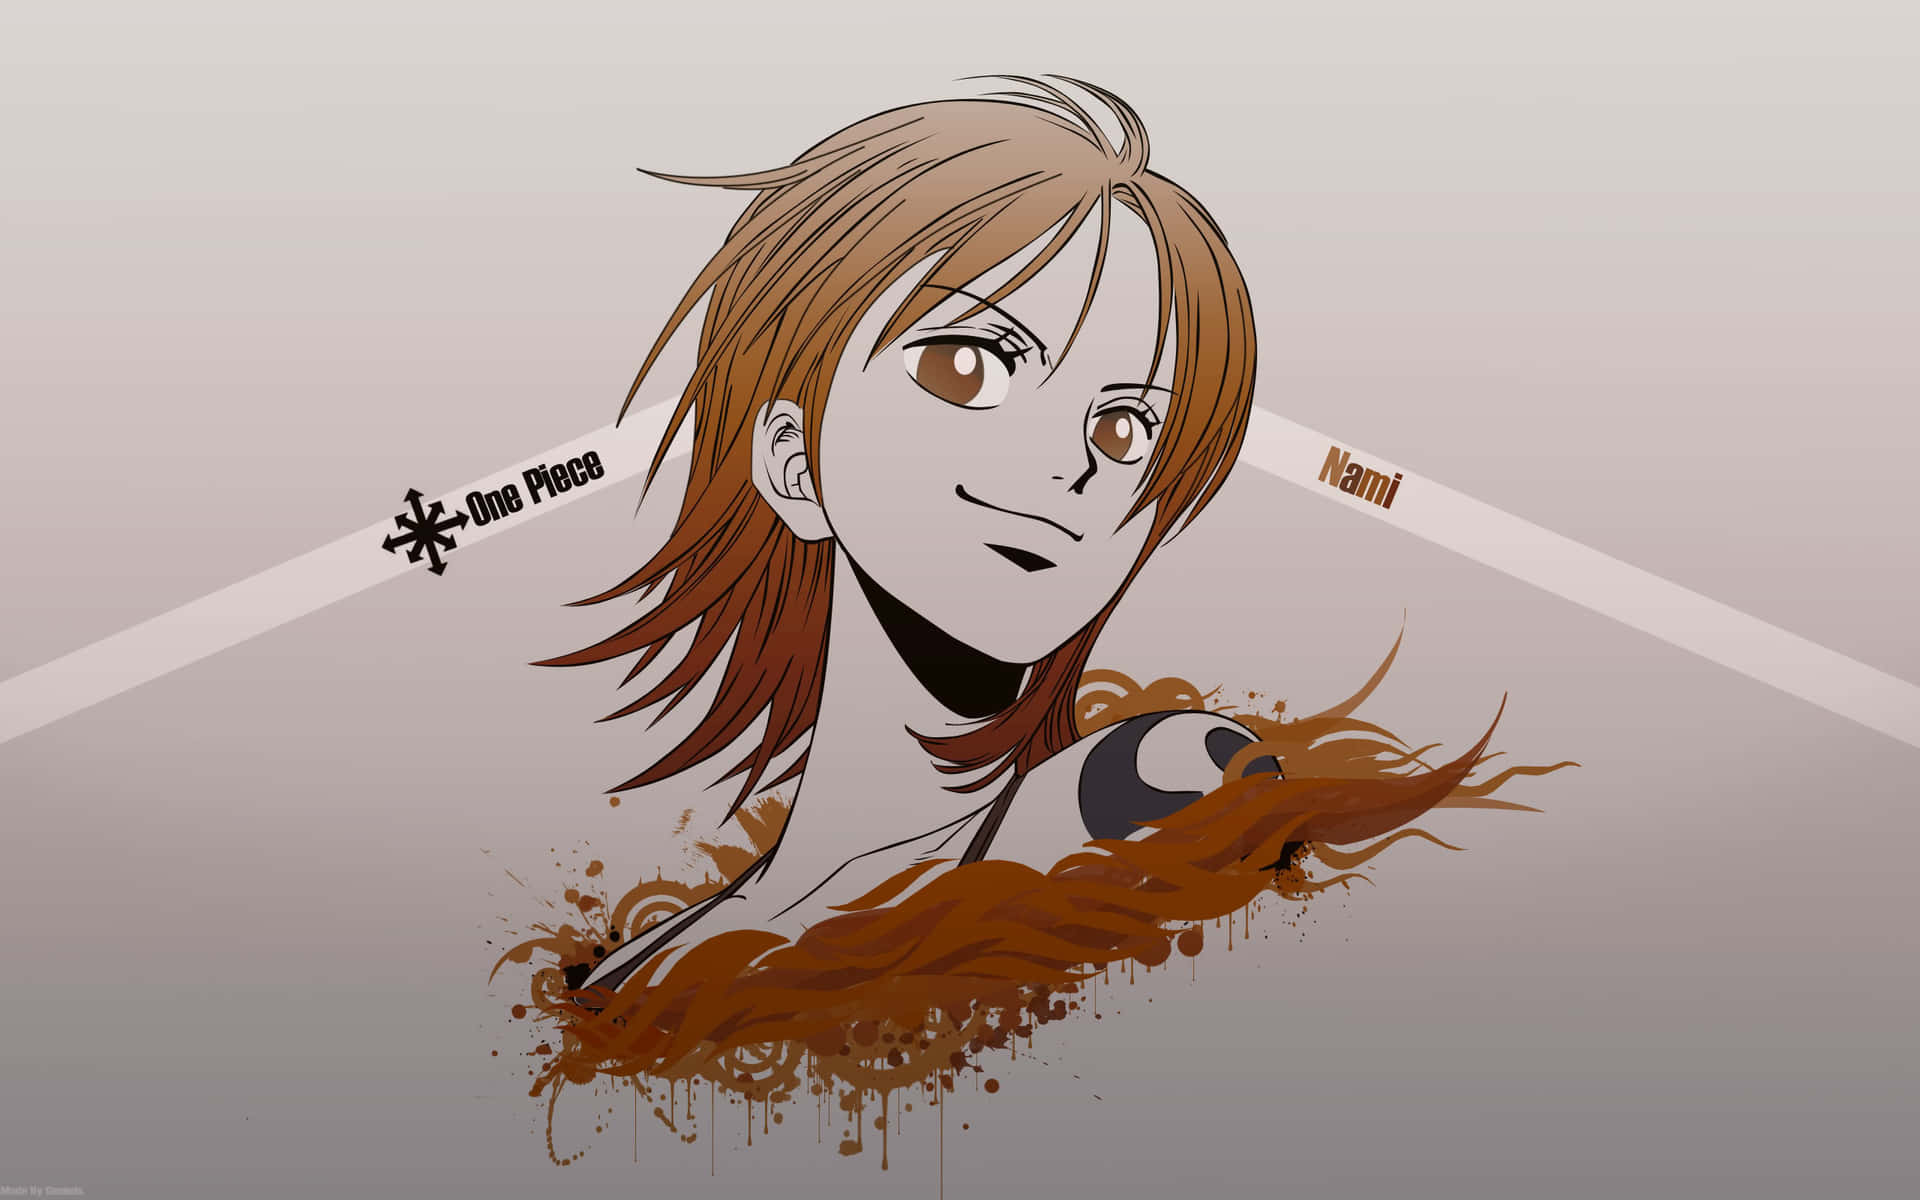 Short Haired Nami One Piece Wallpaper